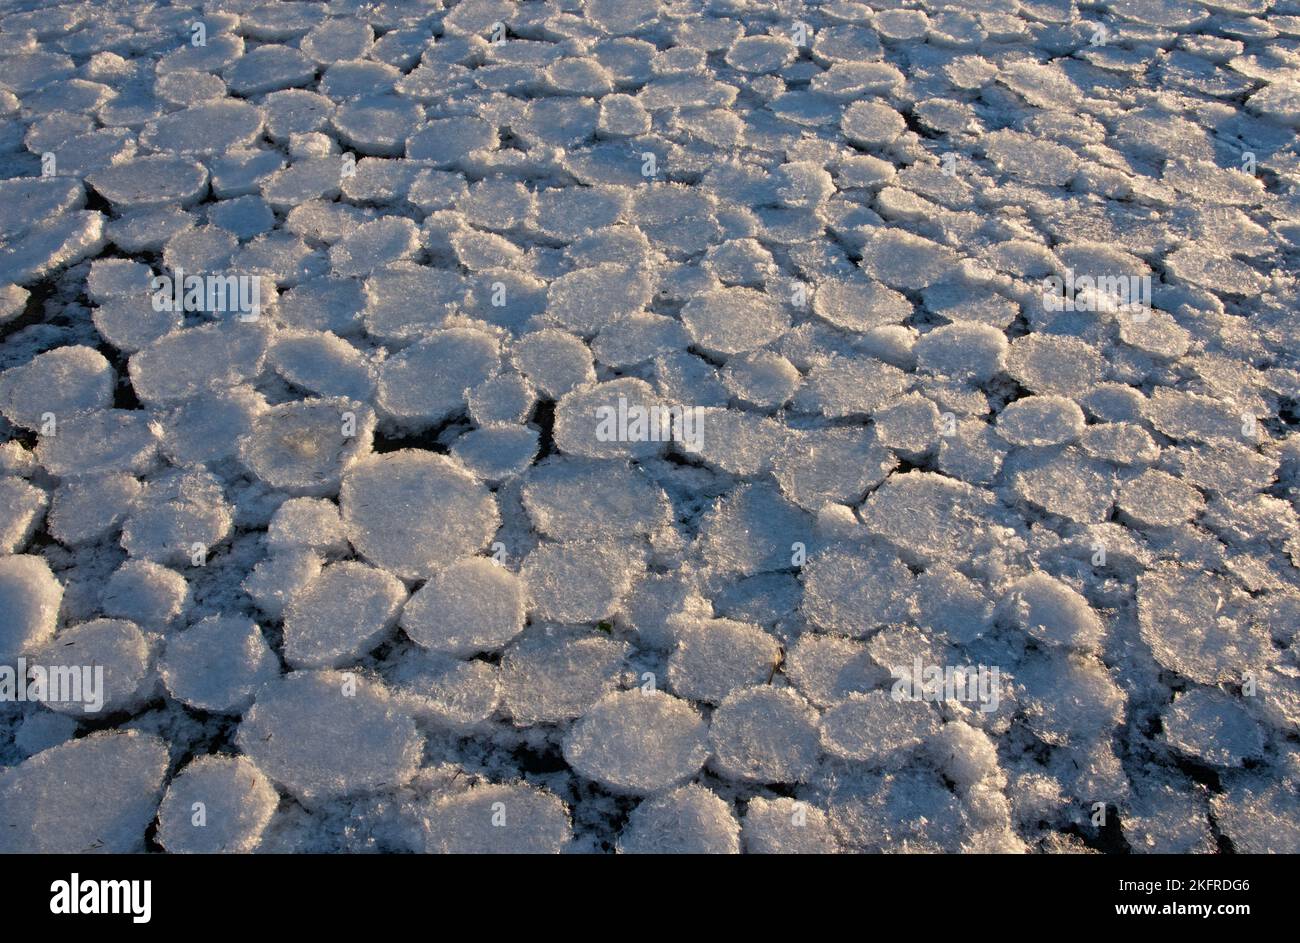 Frozen ice circles stranded on beach at low tide in Southeast Alaska. Stock Photo